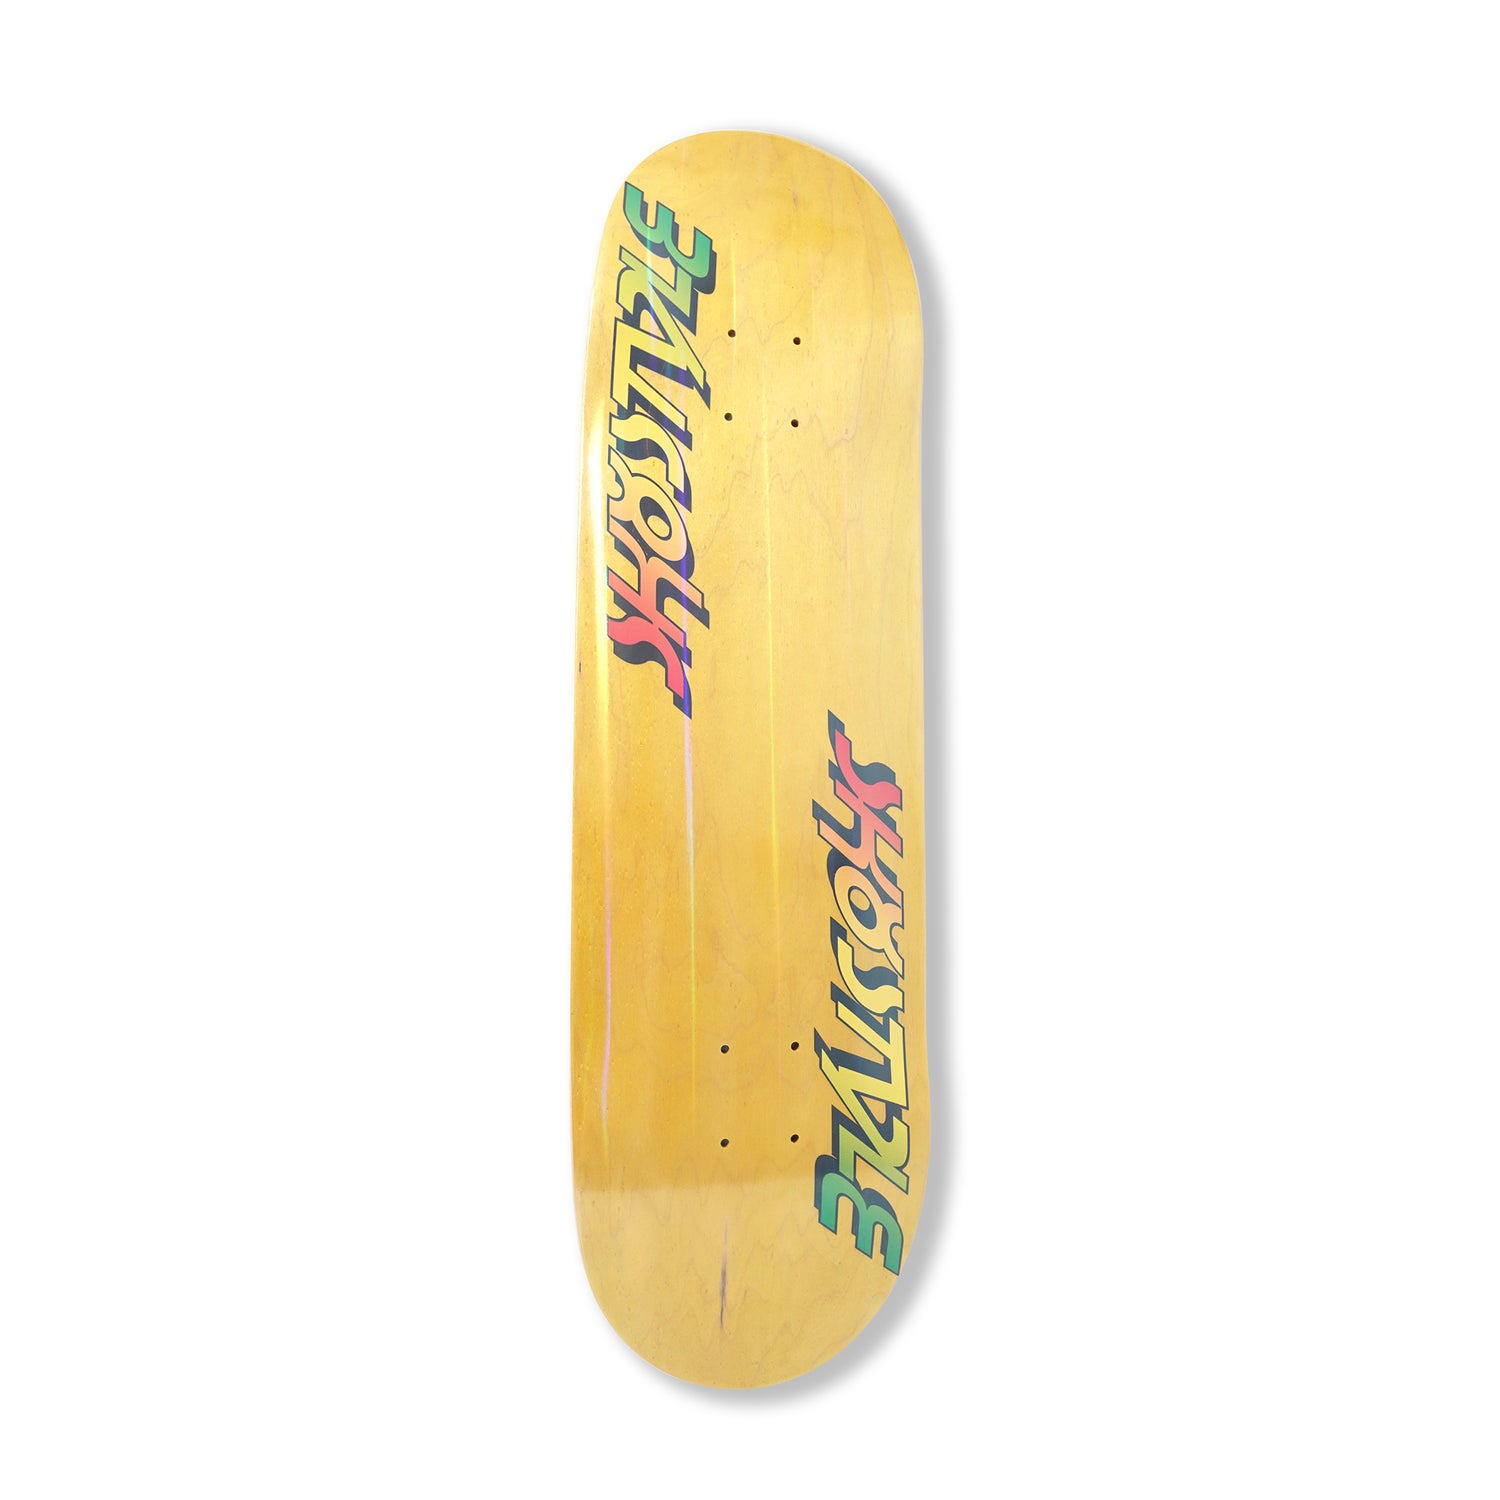 Sk8style Deck